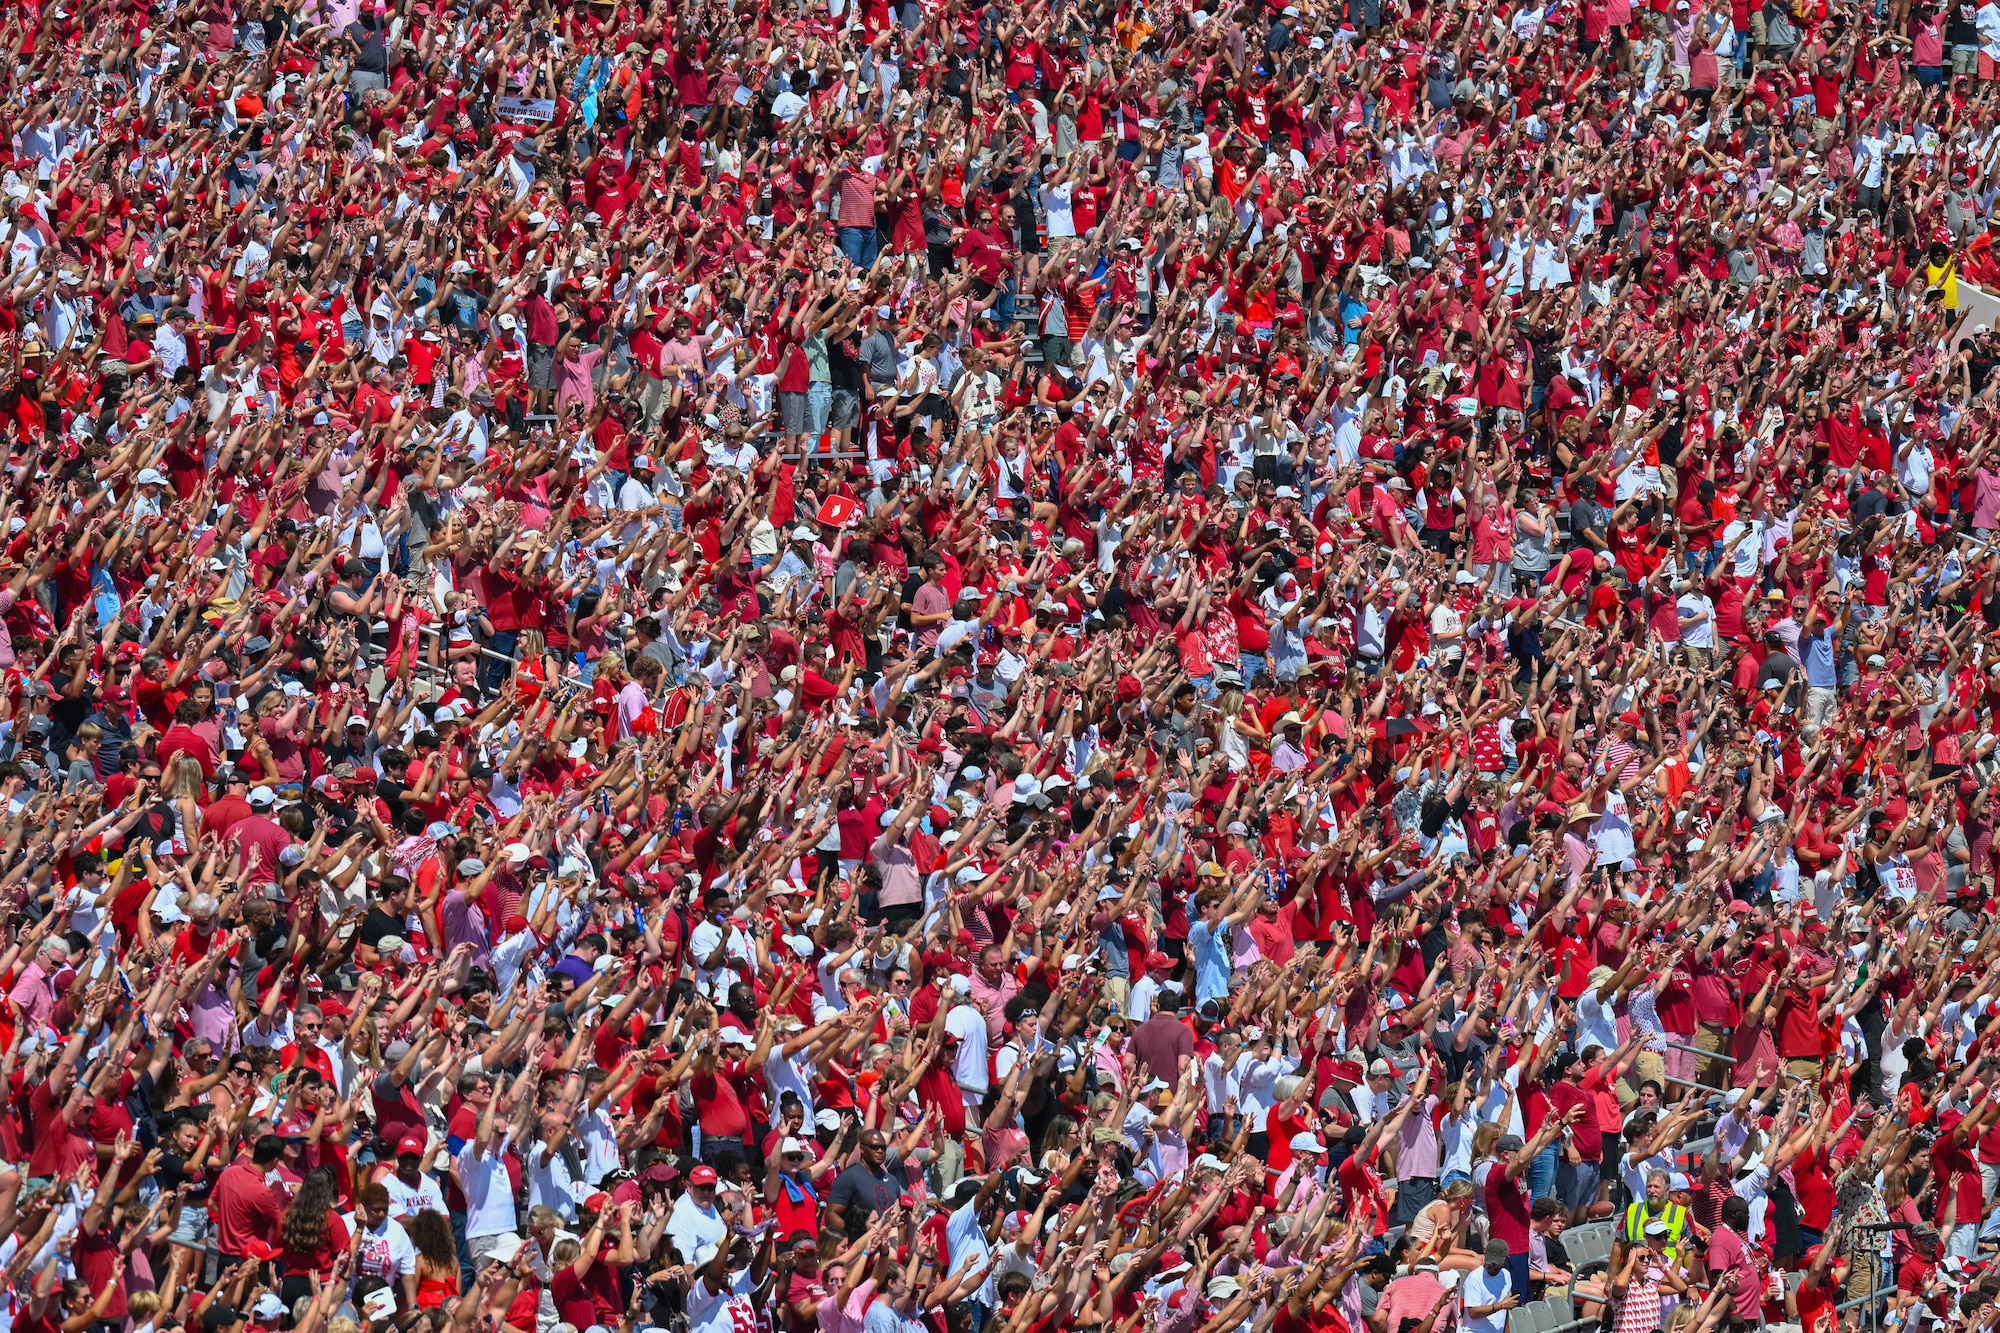 Fans cheer in the stands at a University of Arkansas Razorbacks football game